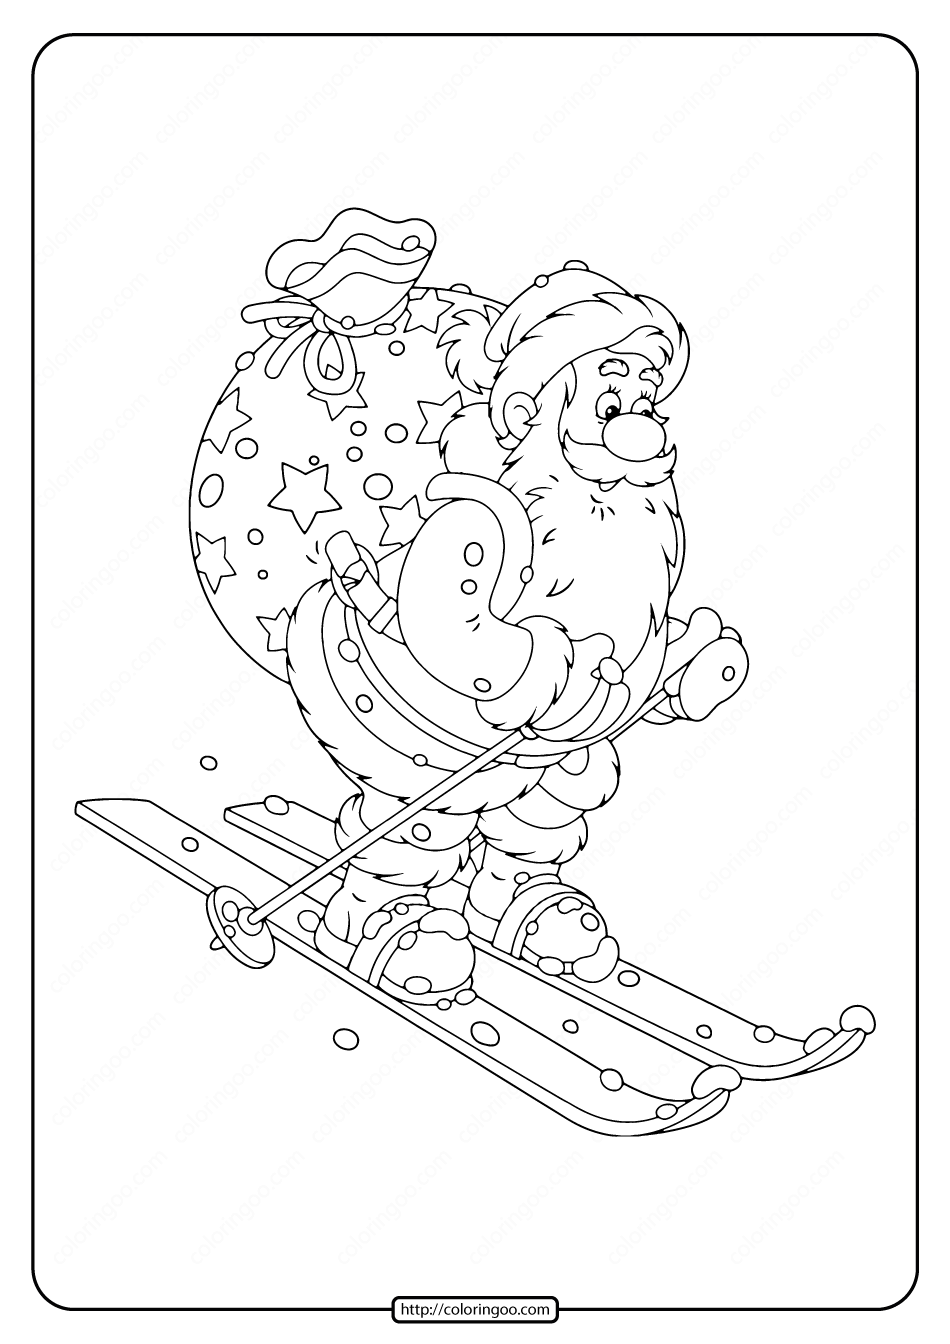 santa claus with a bag of gifts coloring pages